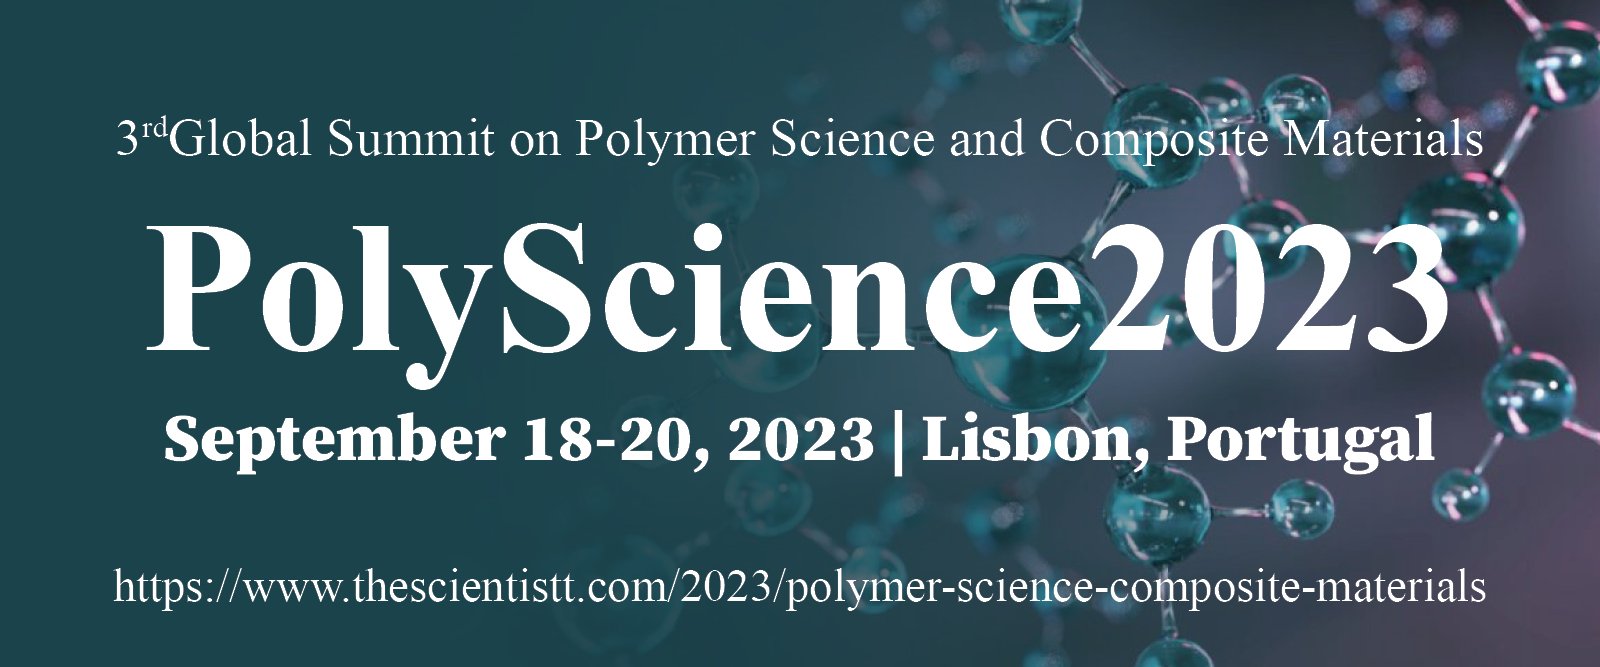 PolyScience2023 Polymer Science and Composite Materials2023 Conference